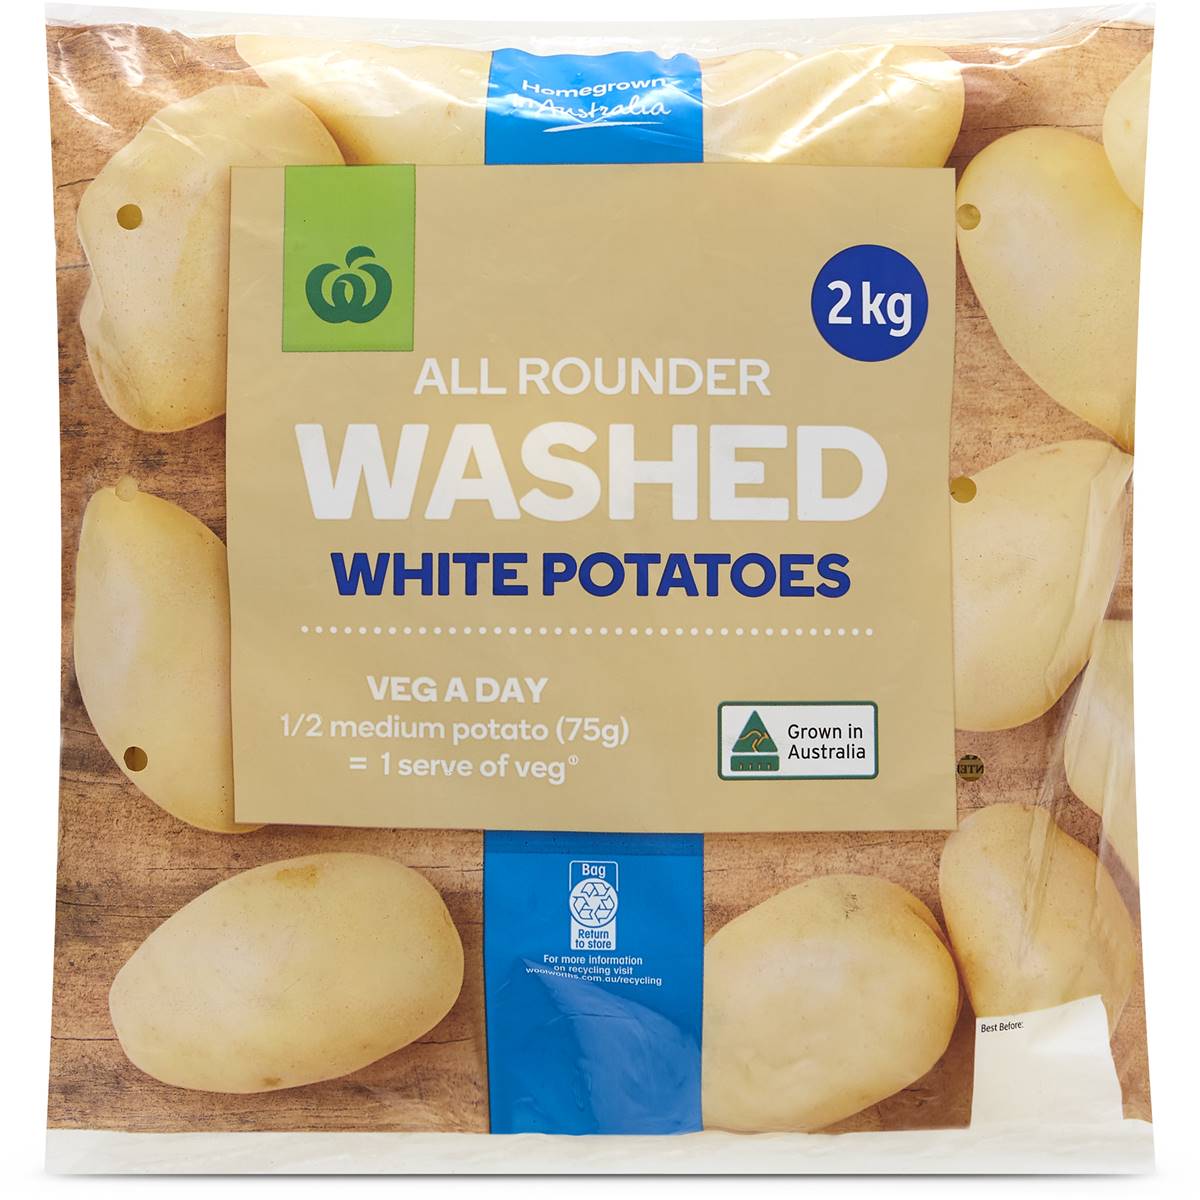 Calories in Woolworths Washed Potatoes